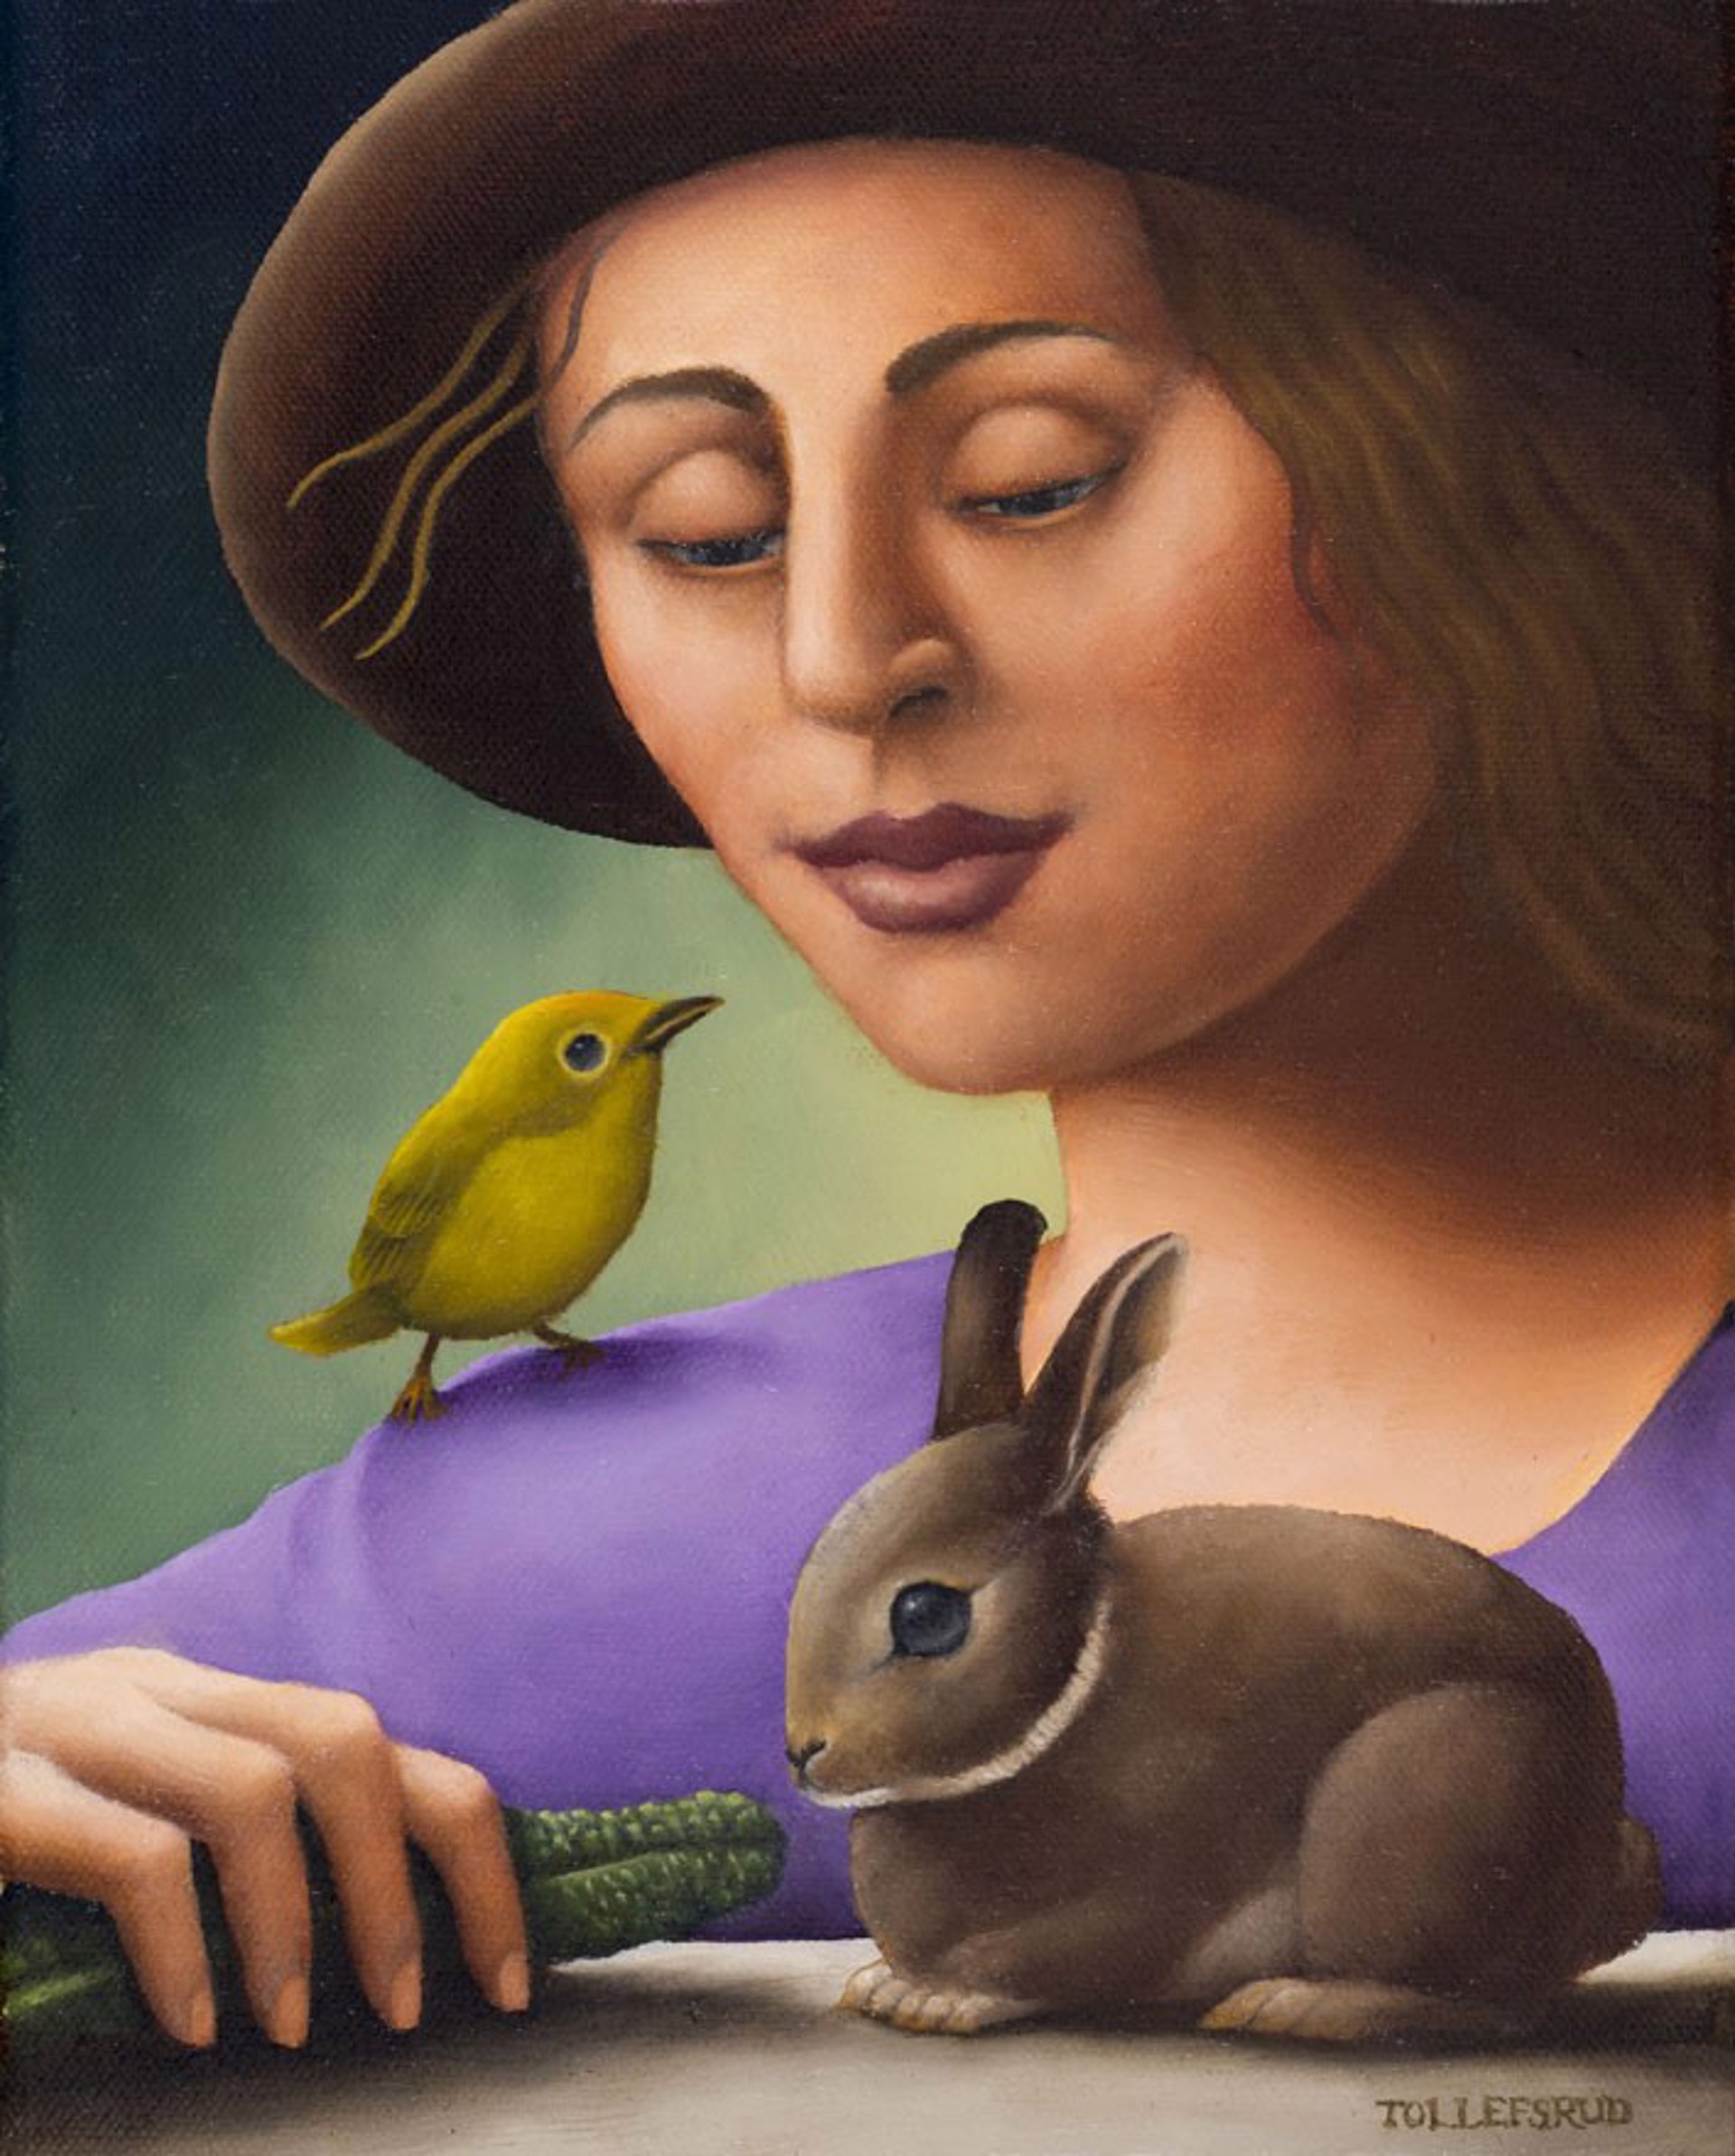 The Bird and the Bunny by Cynthia Tollefsrud